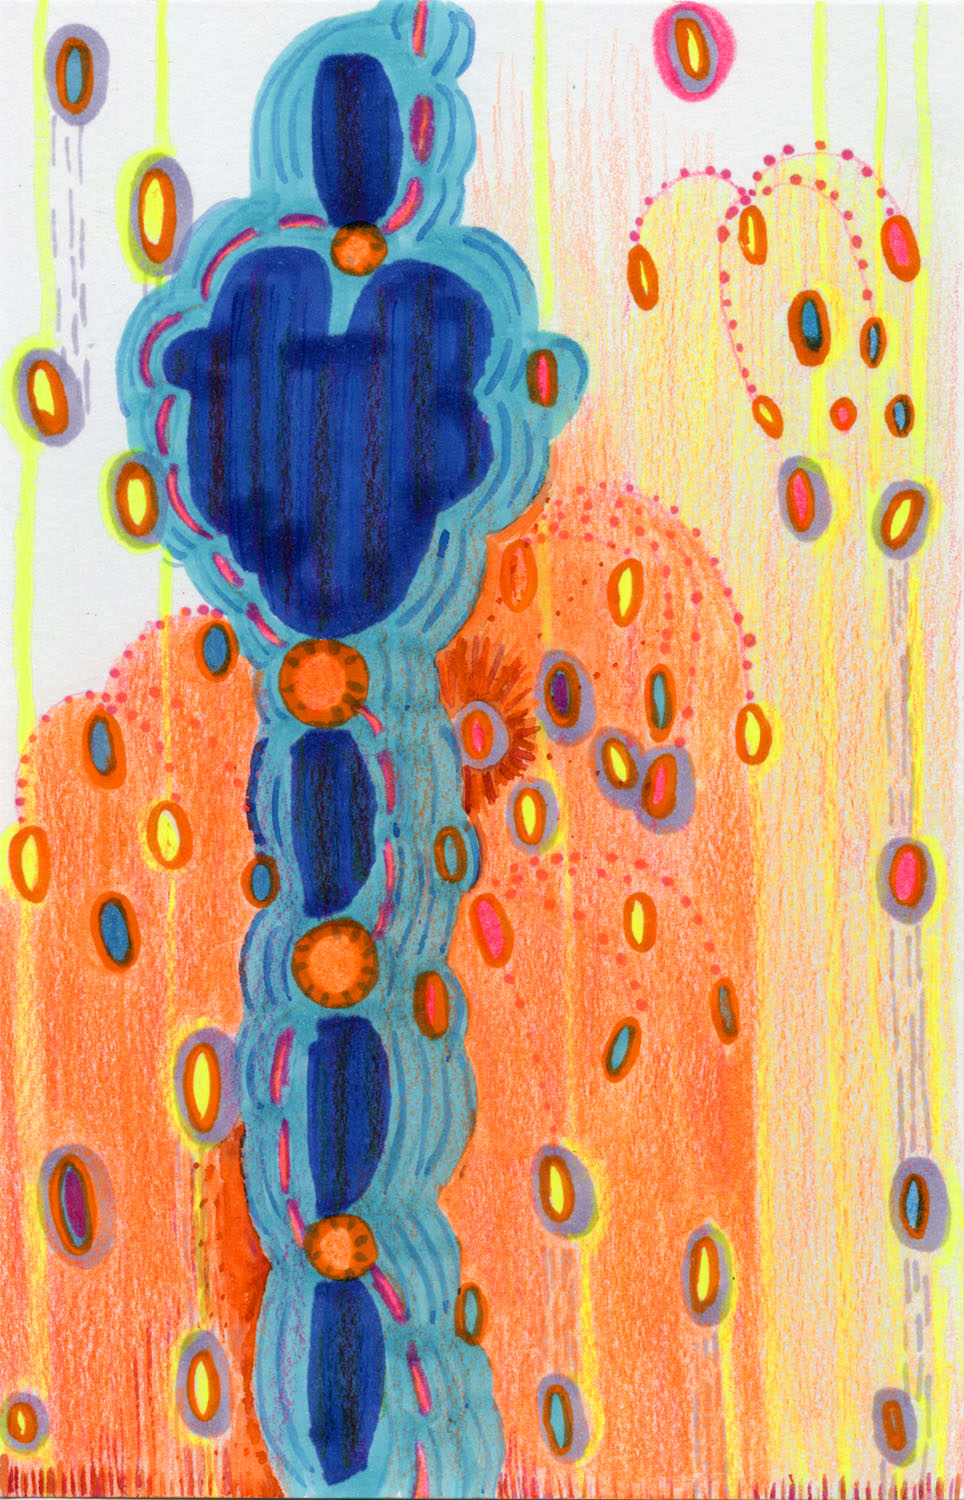 Bright, abstract drawing dominated by a blue vertical pathway with orange and yellow background.